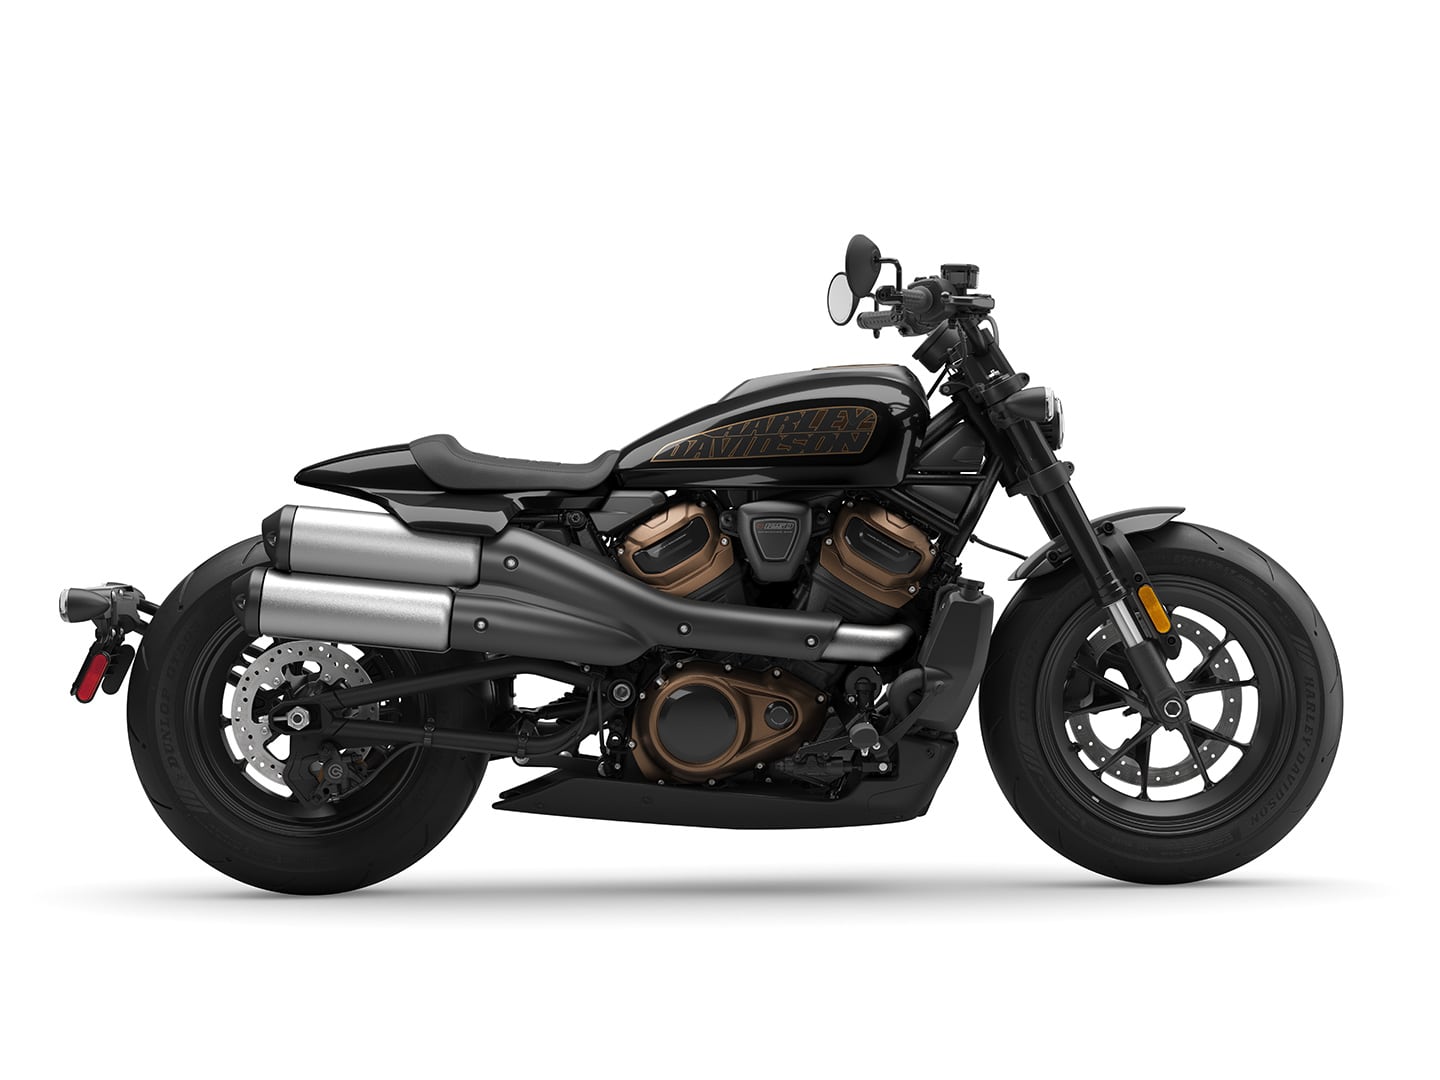 The Sportster S in Vivid Black, which adds $300 to the base price.